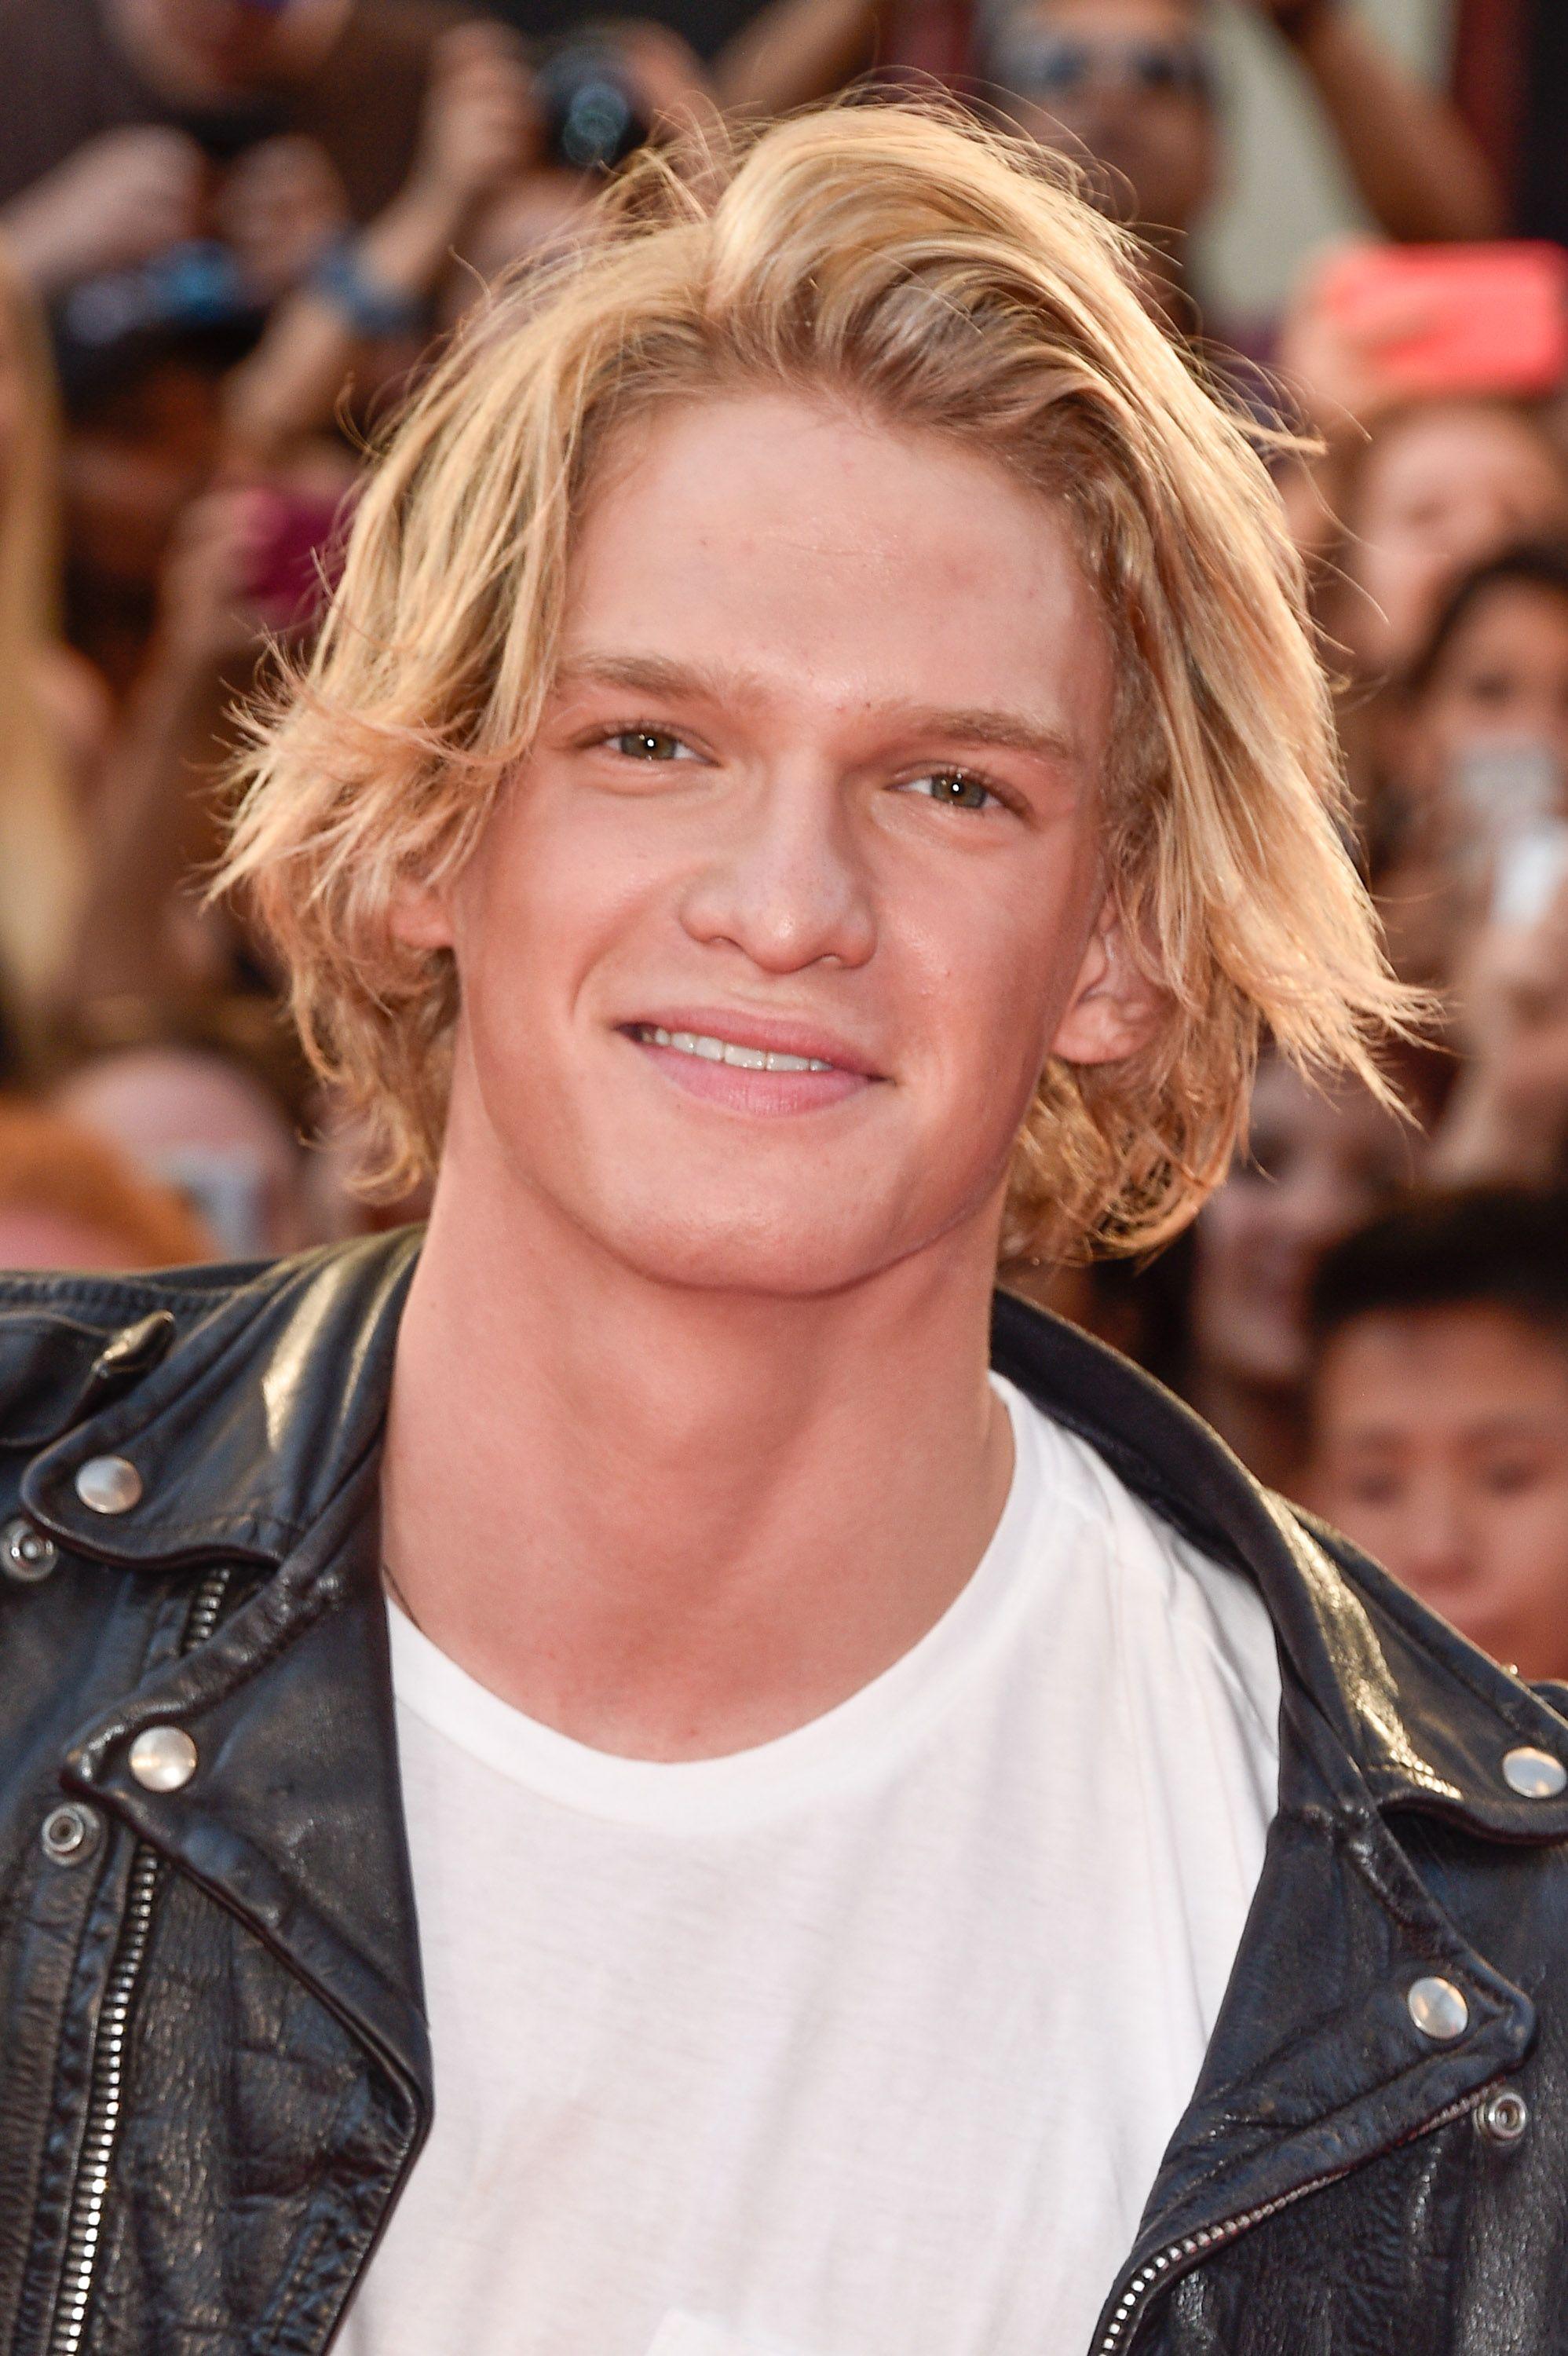 Cody Simpson: Singer Posts Funny Photo Showing Off His Long Hair